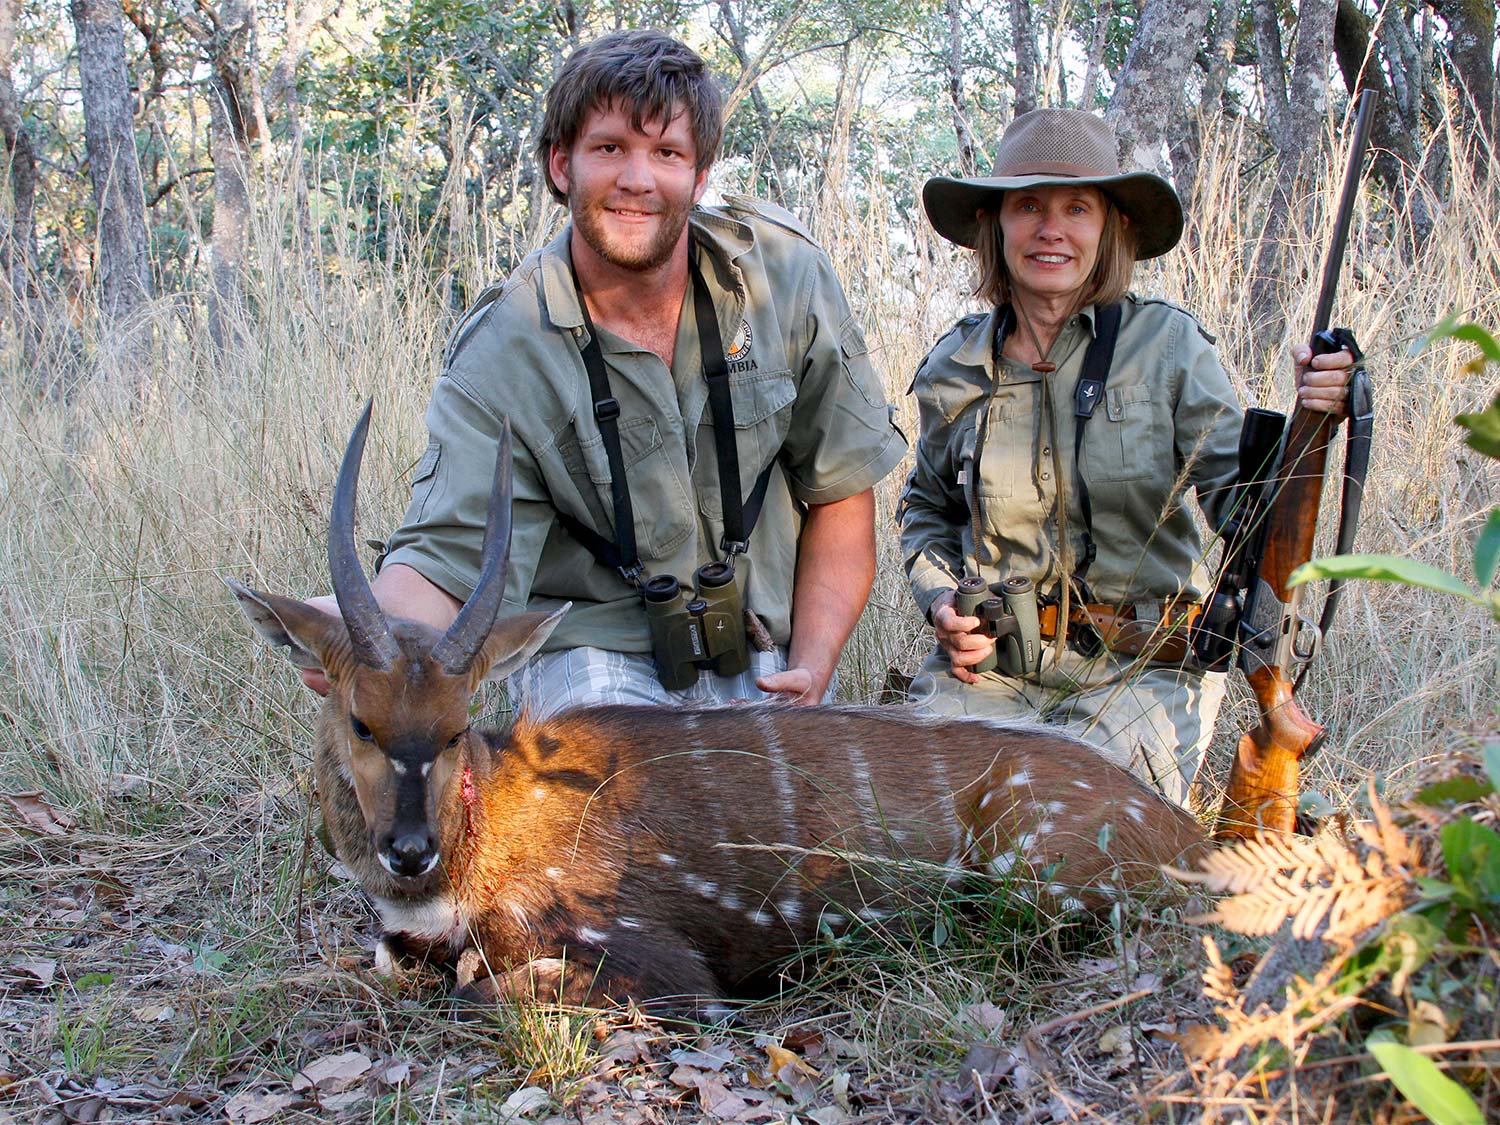 A male and female hunter kneels behind a bushbuck ram.